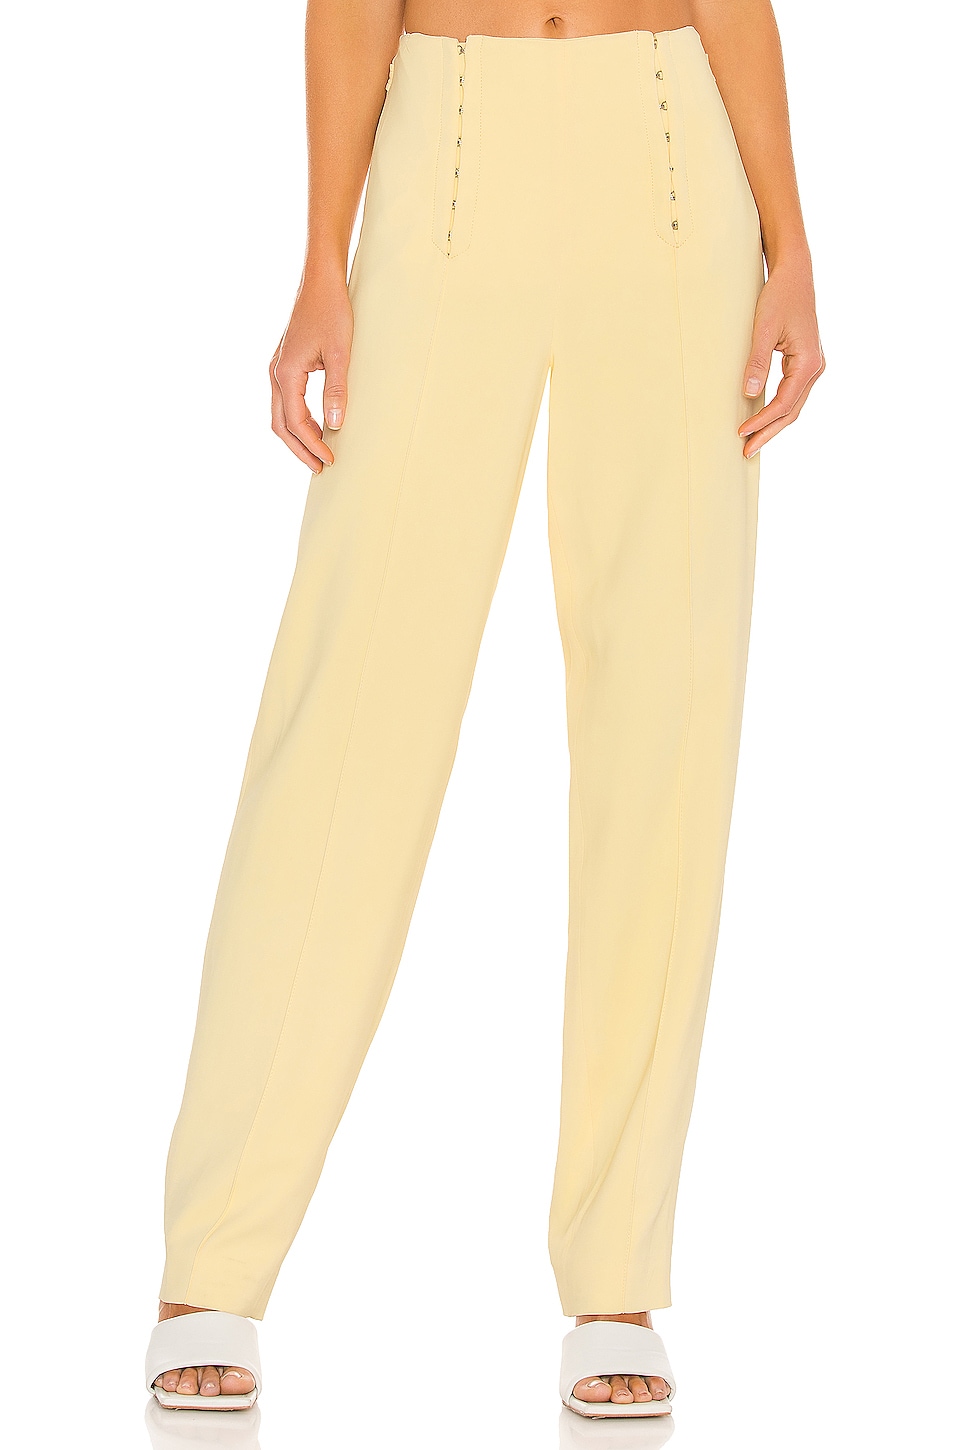 Dion Lee Corset Trouser in Bleached Yellow | REVOLVE